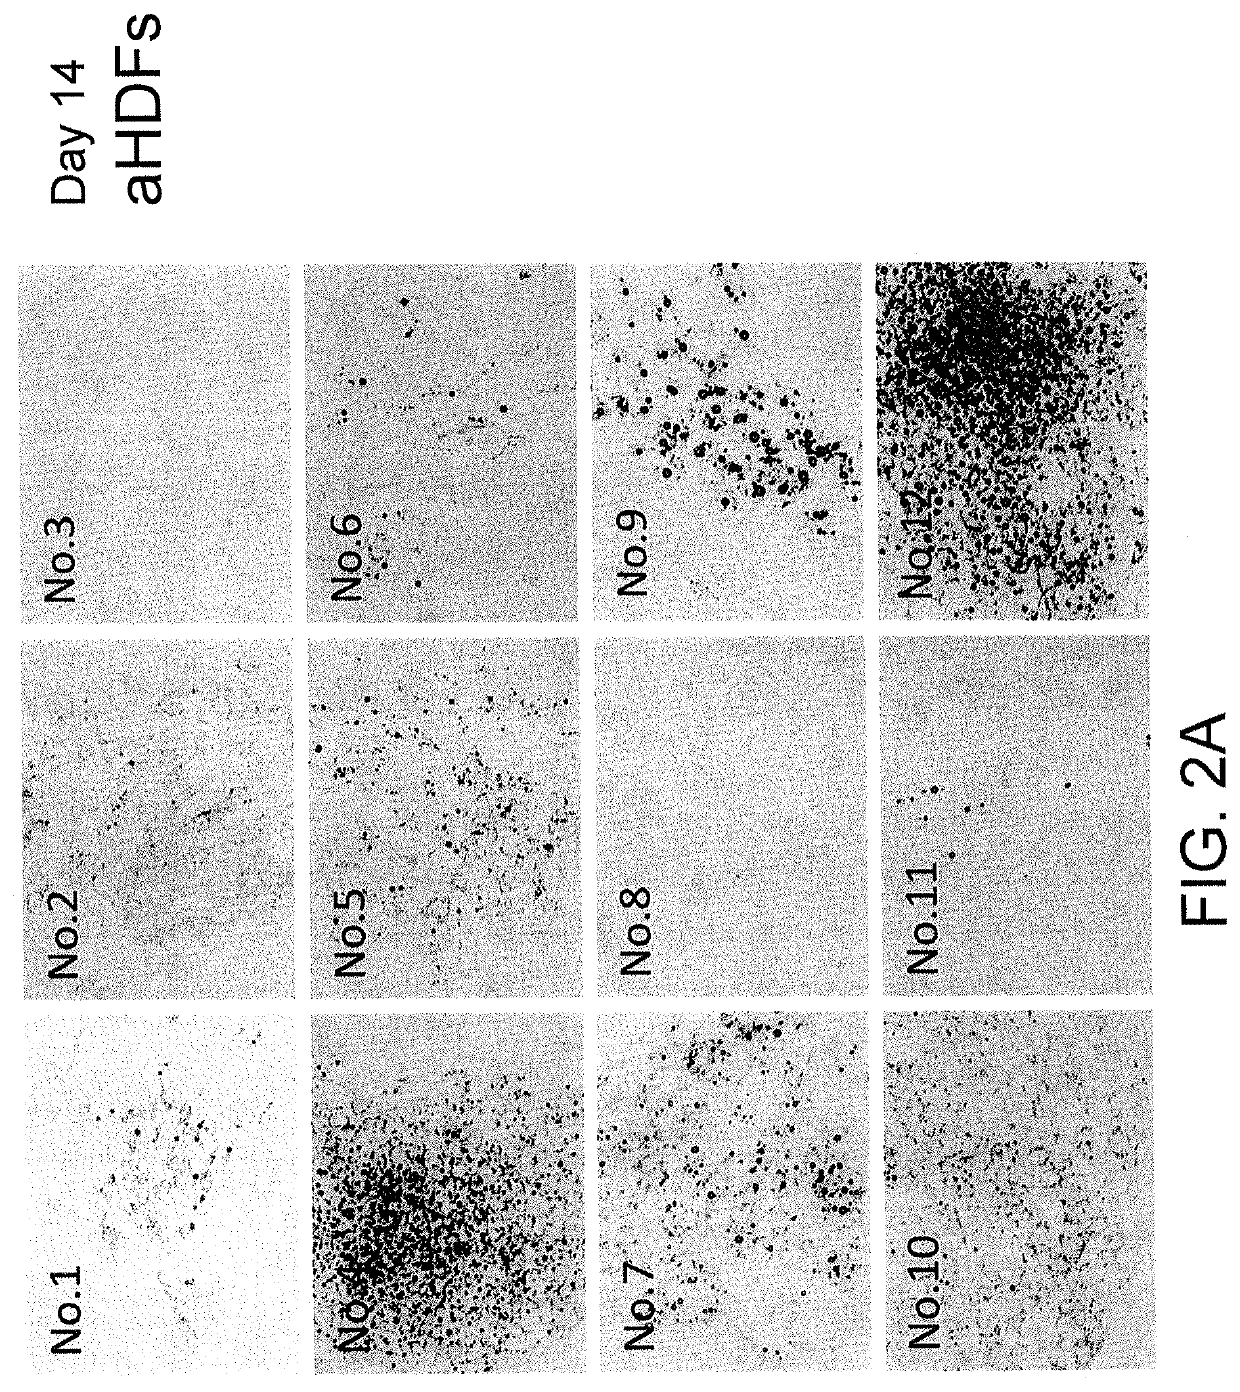 Brown fat cells and method for preparing same